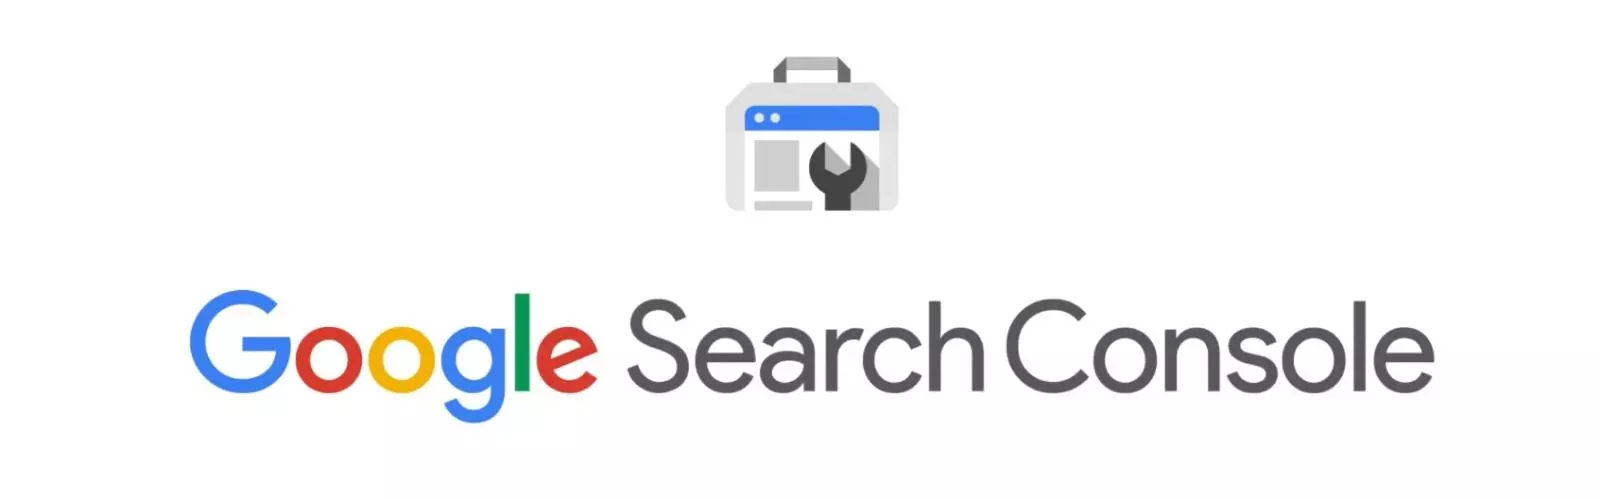 Google Search Console Set Up With All Geoffresh Websites